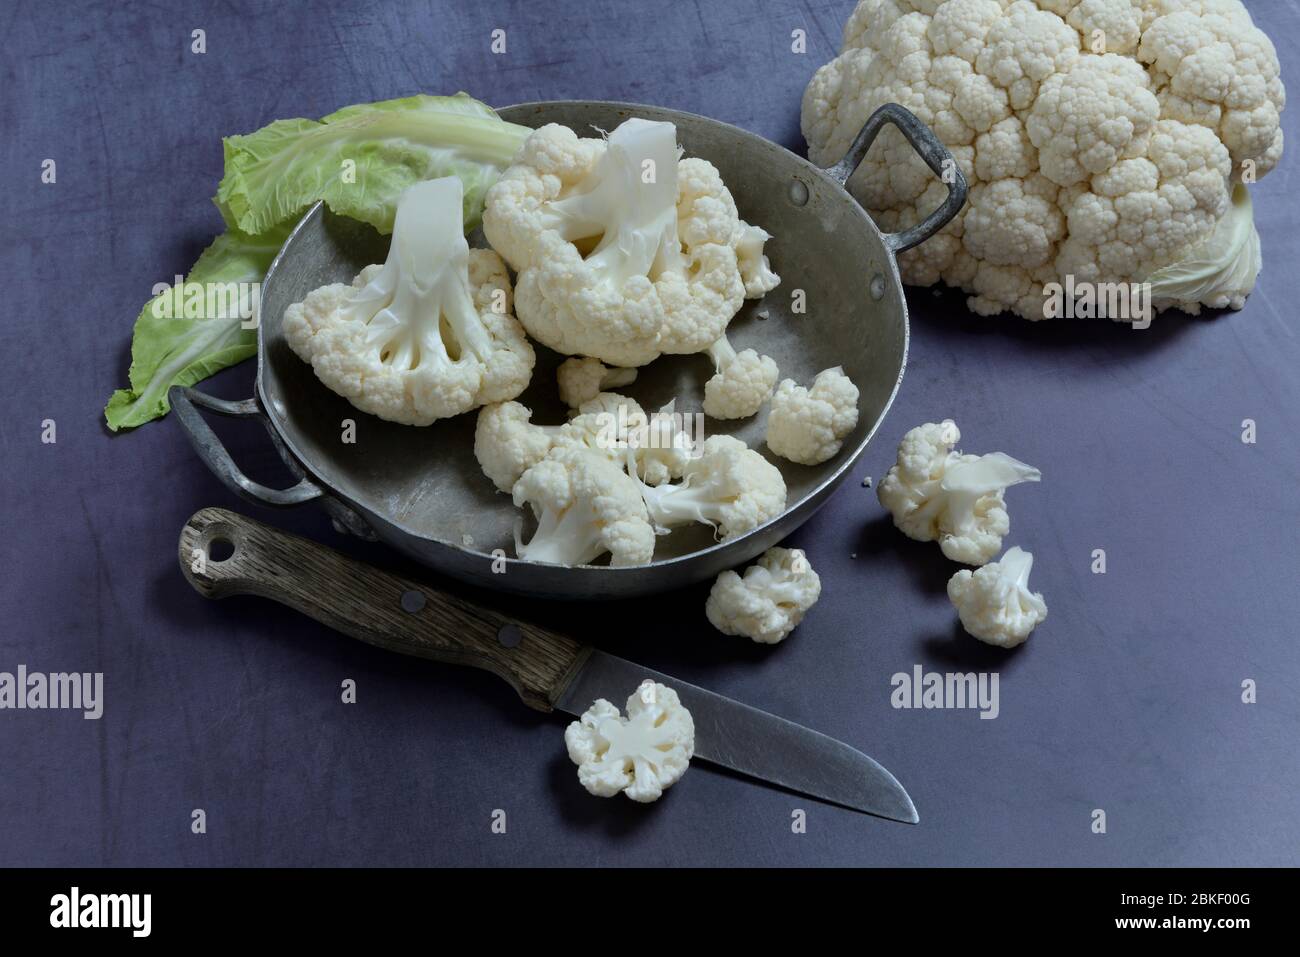 Cauliflower in bowl and kitchen knife, food photography, studio shot, Germany Stock Photo